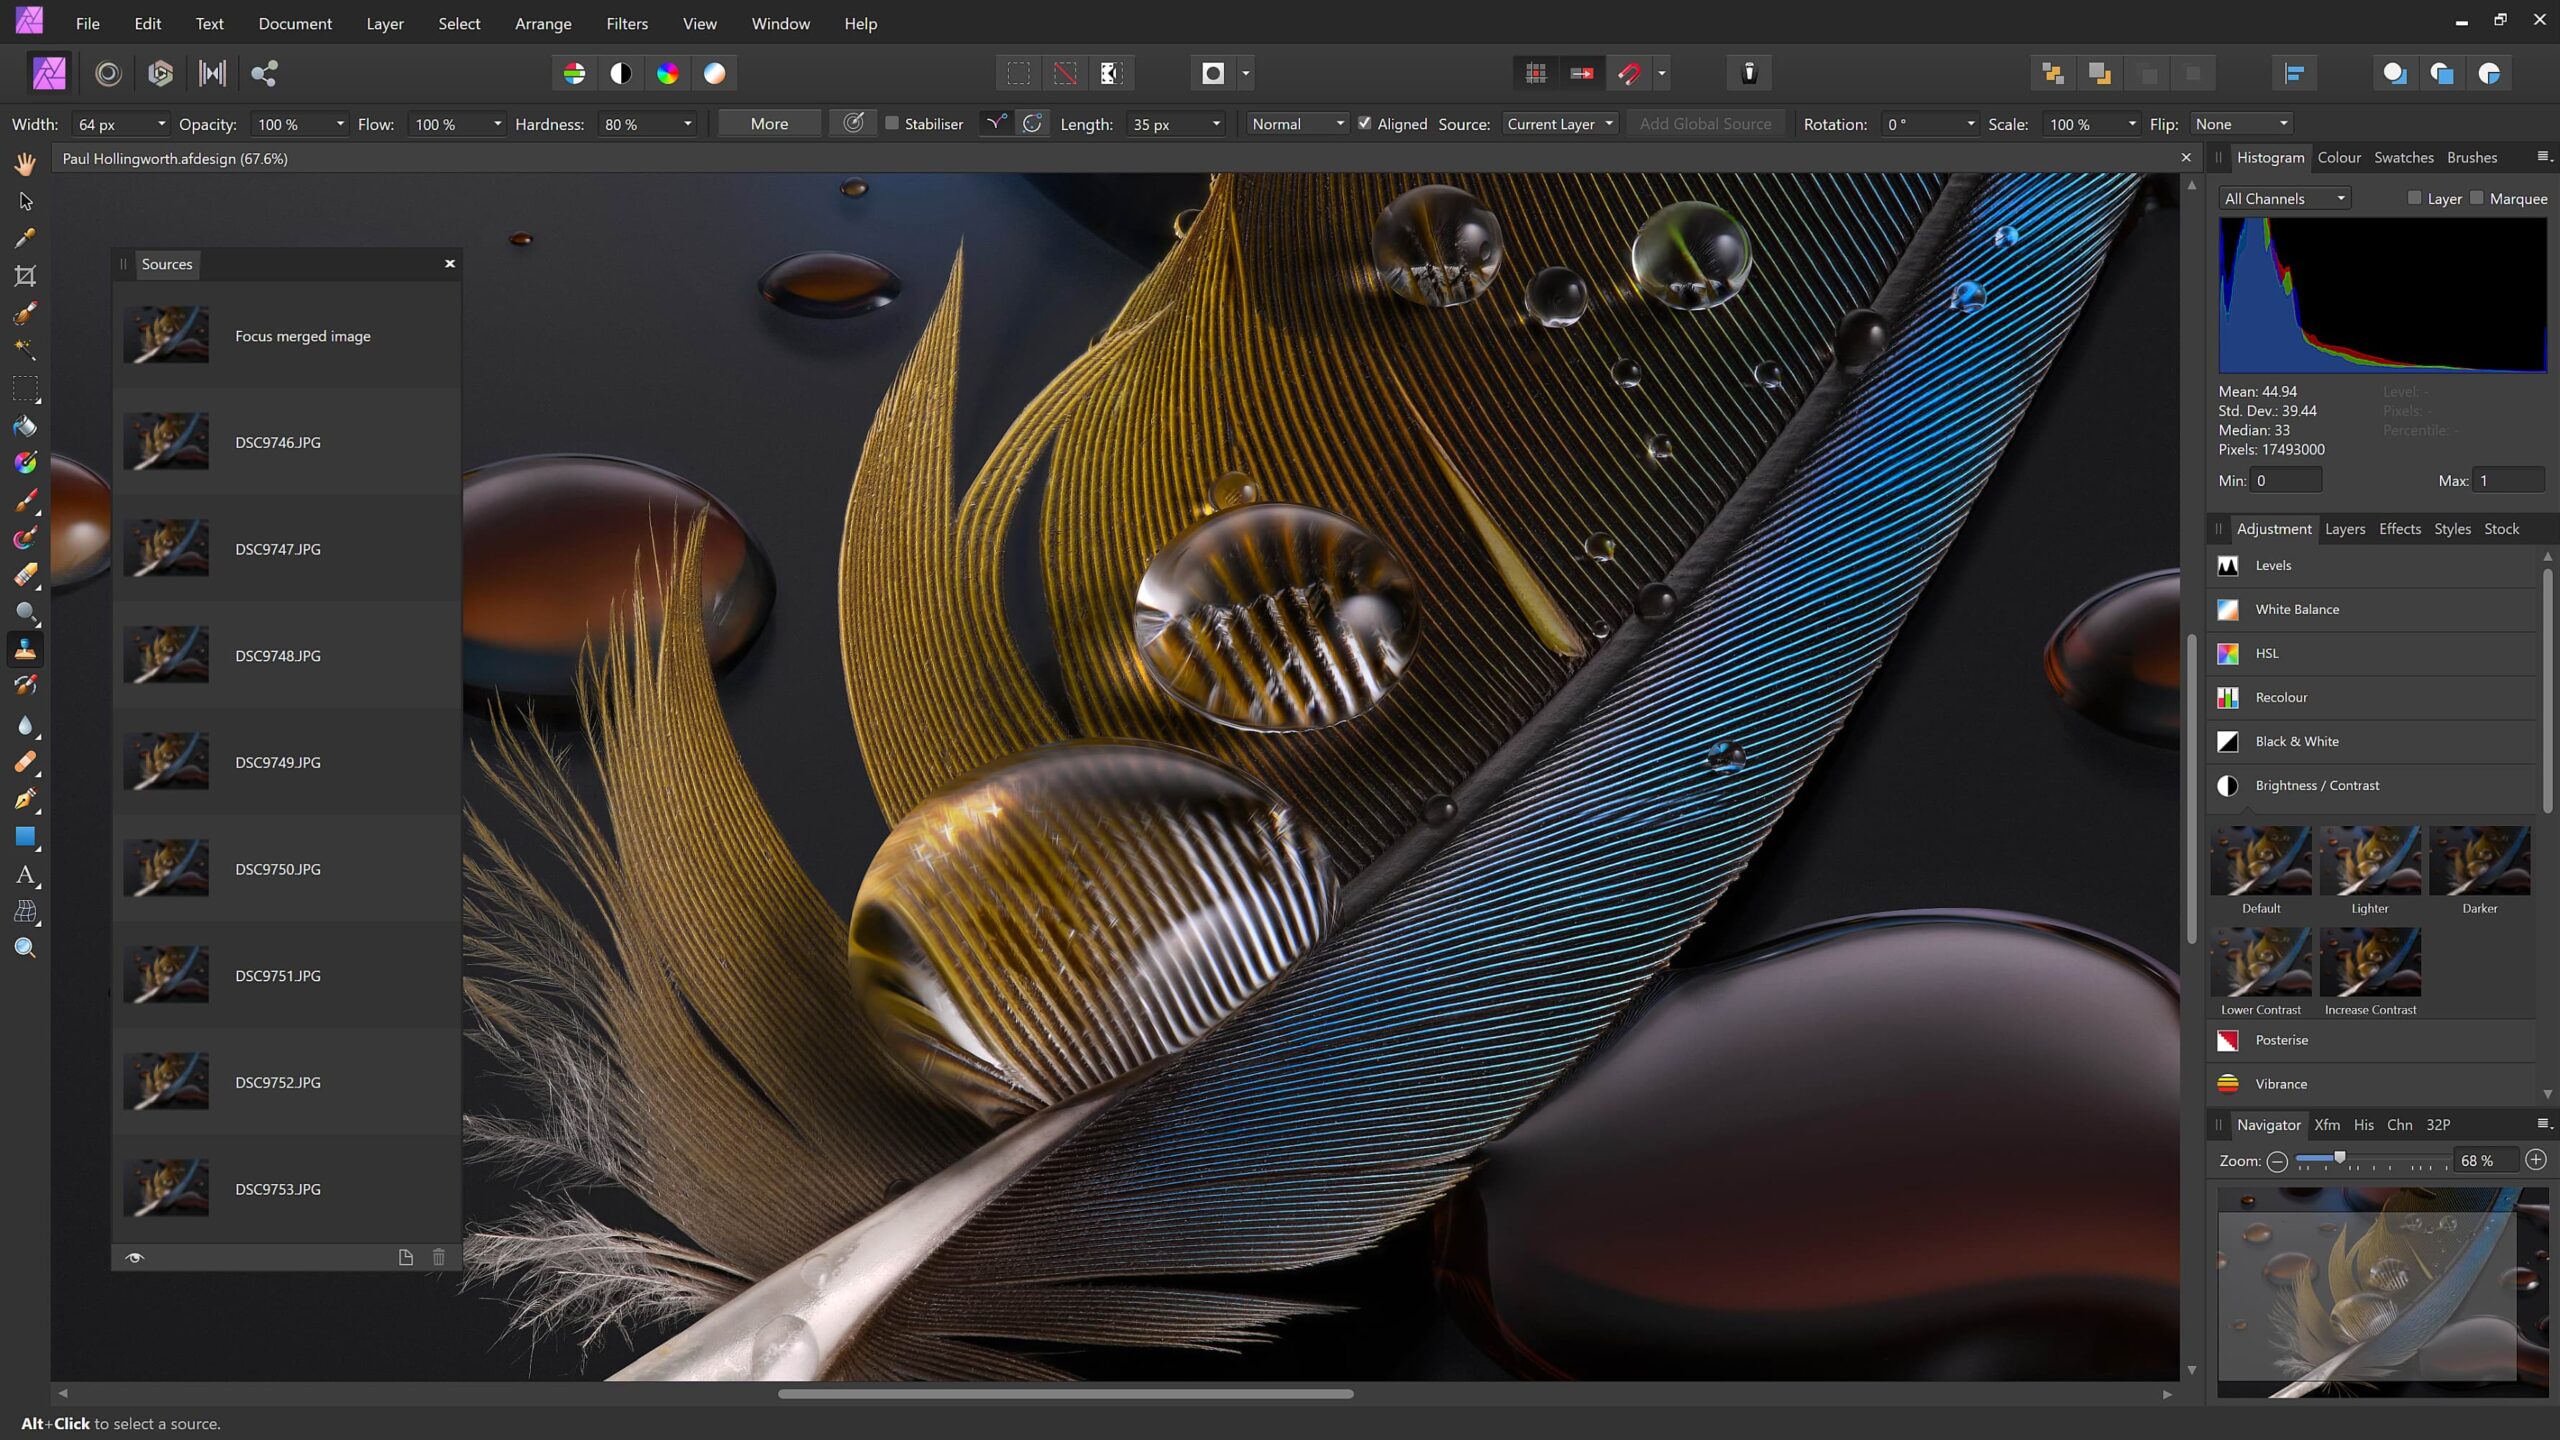 affinity photo editor for mac